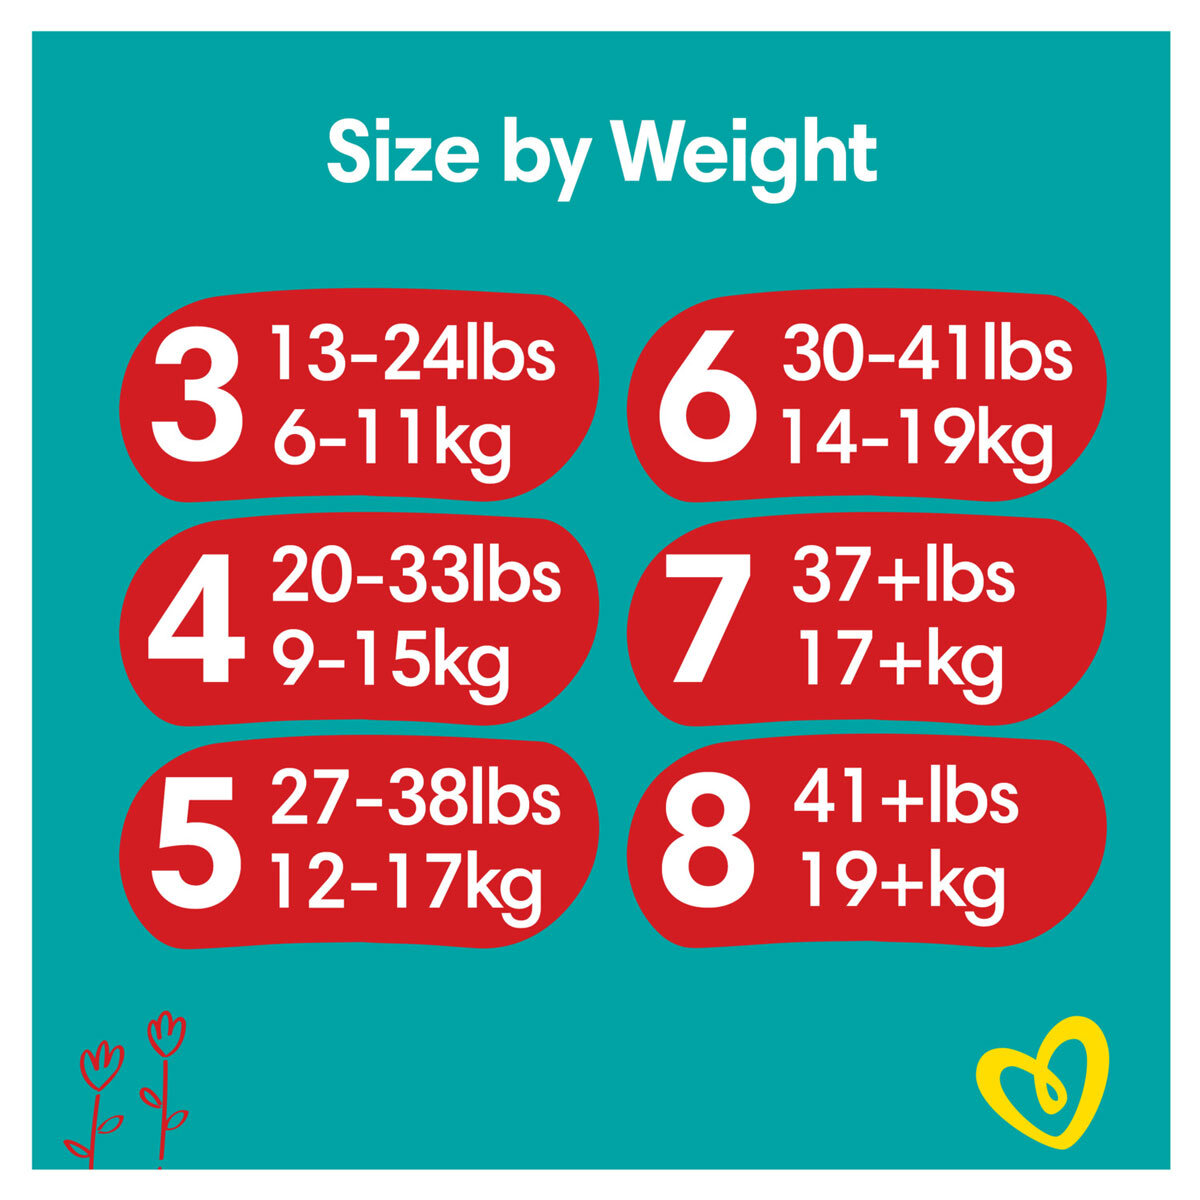 Size by weight